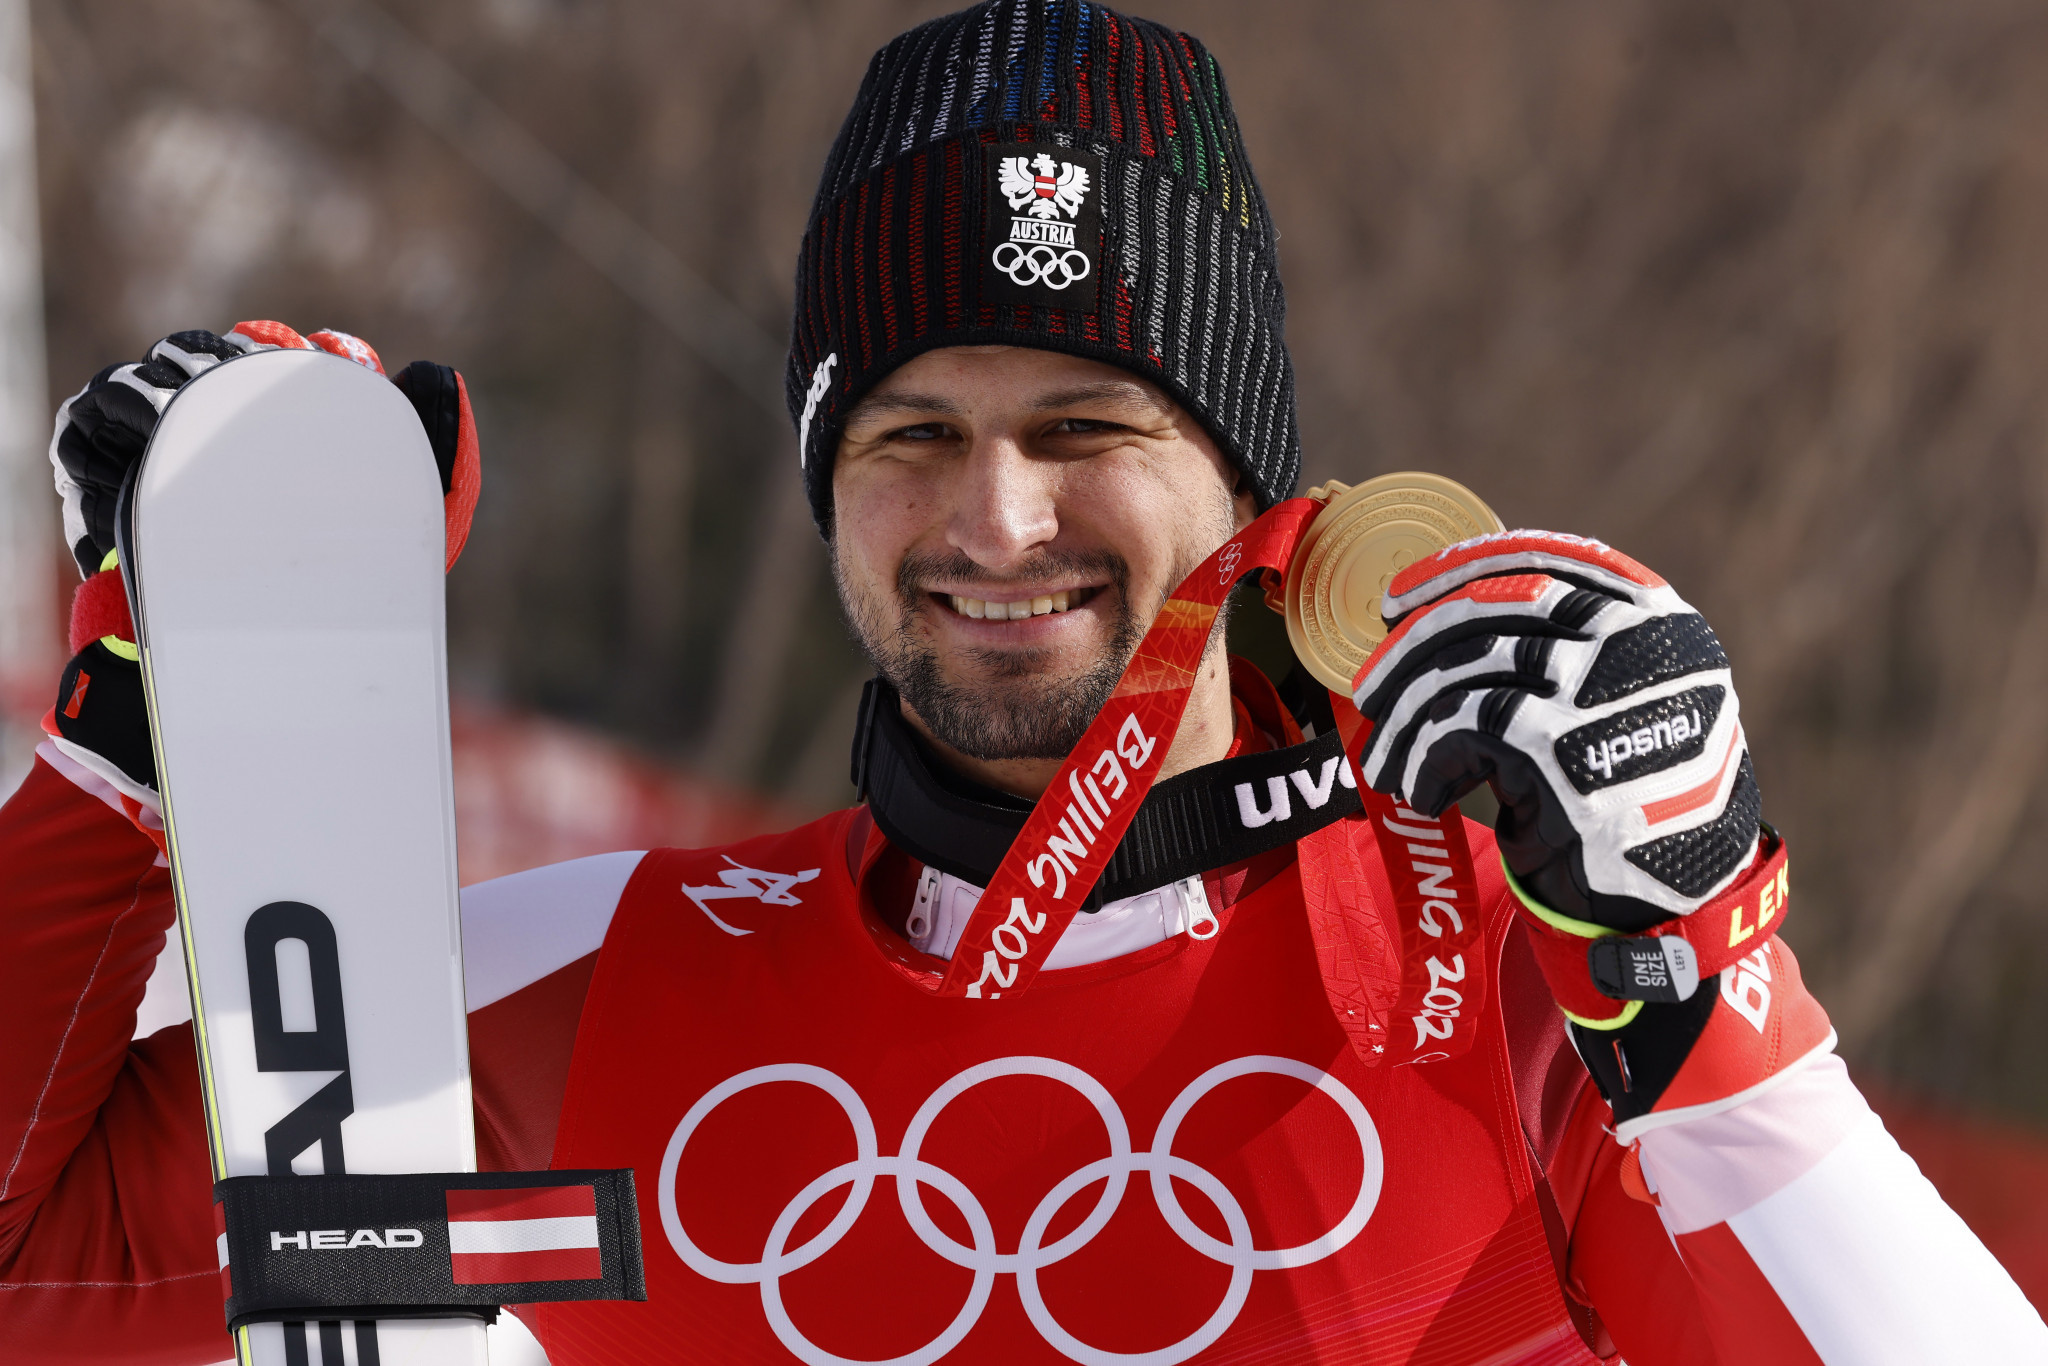 Strolz follows in tracks of father to win Olympic gold medal in Alpine combined at Beijing 2022